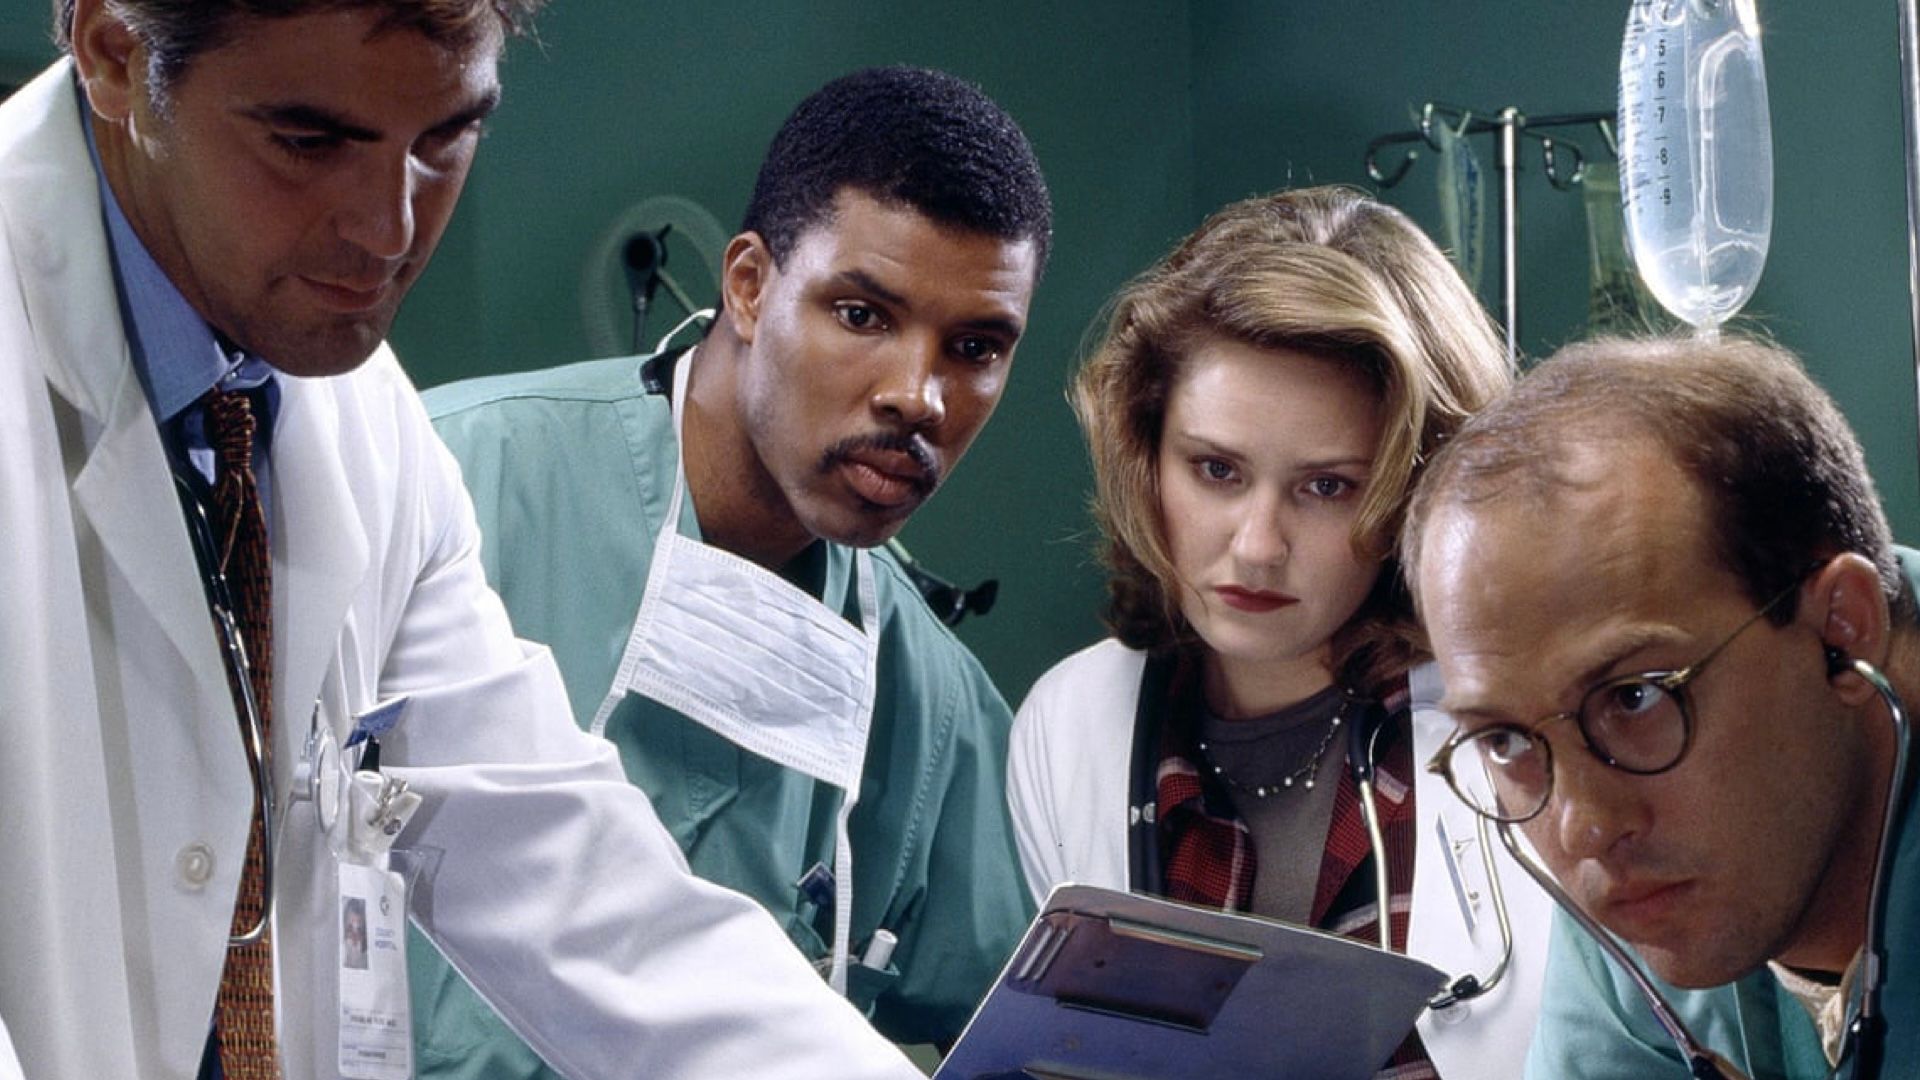 A scene from the NBC medical series ER